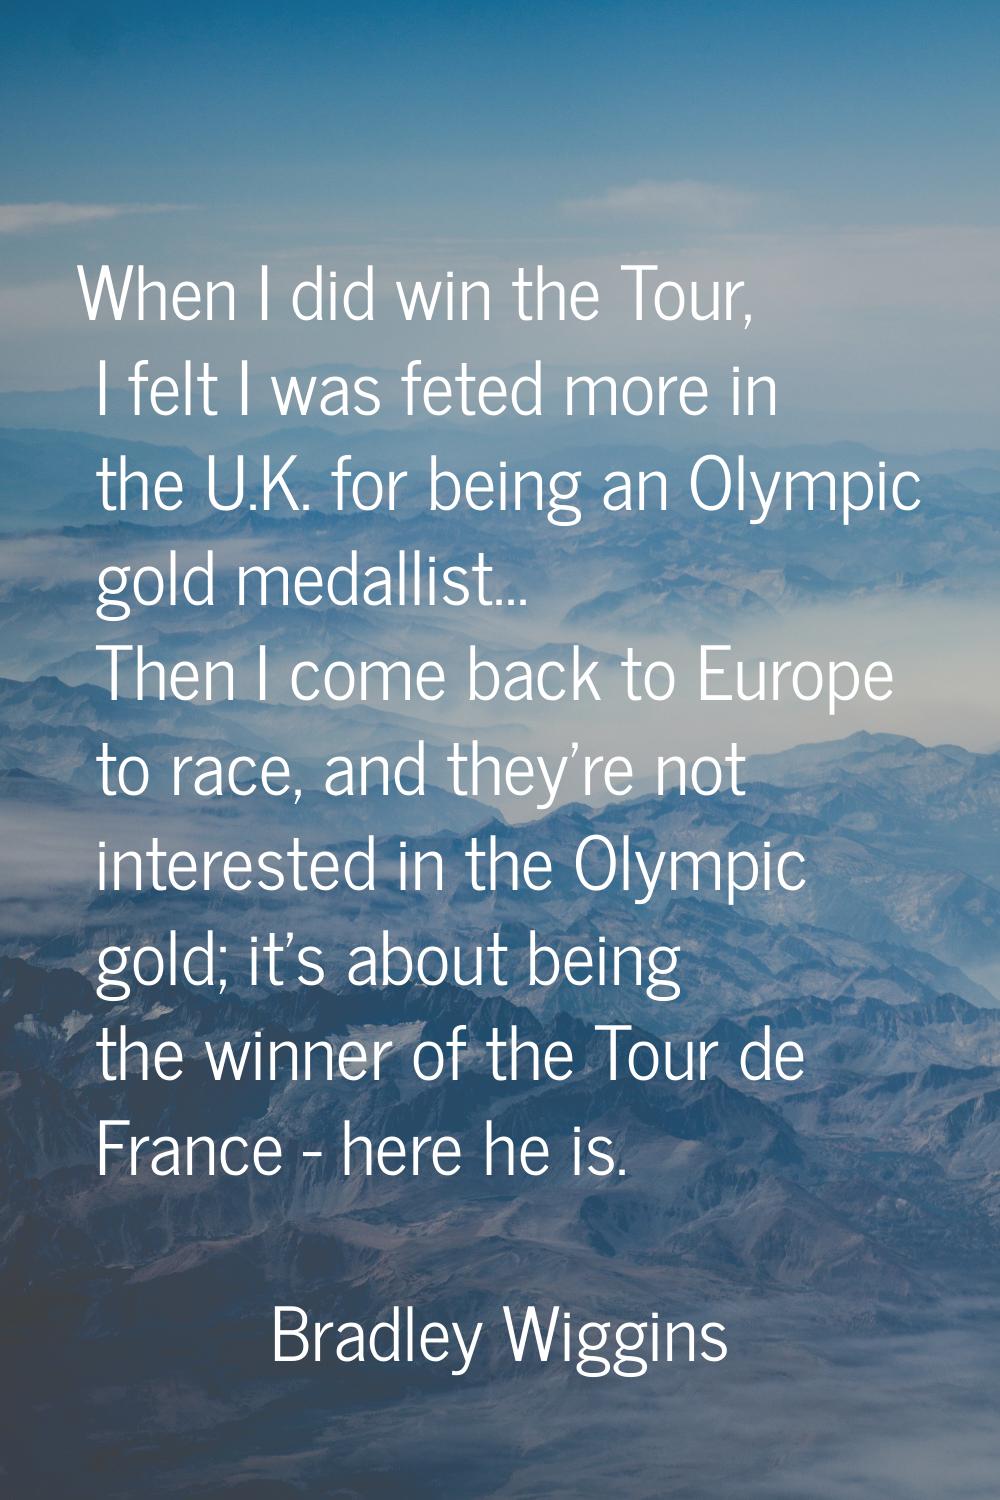 When I did win the Tour, I felt I was feted more in the U.K. for being an Olympic gold medallist...